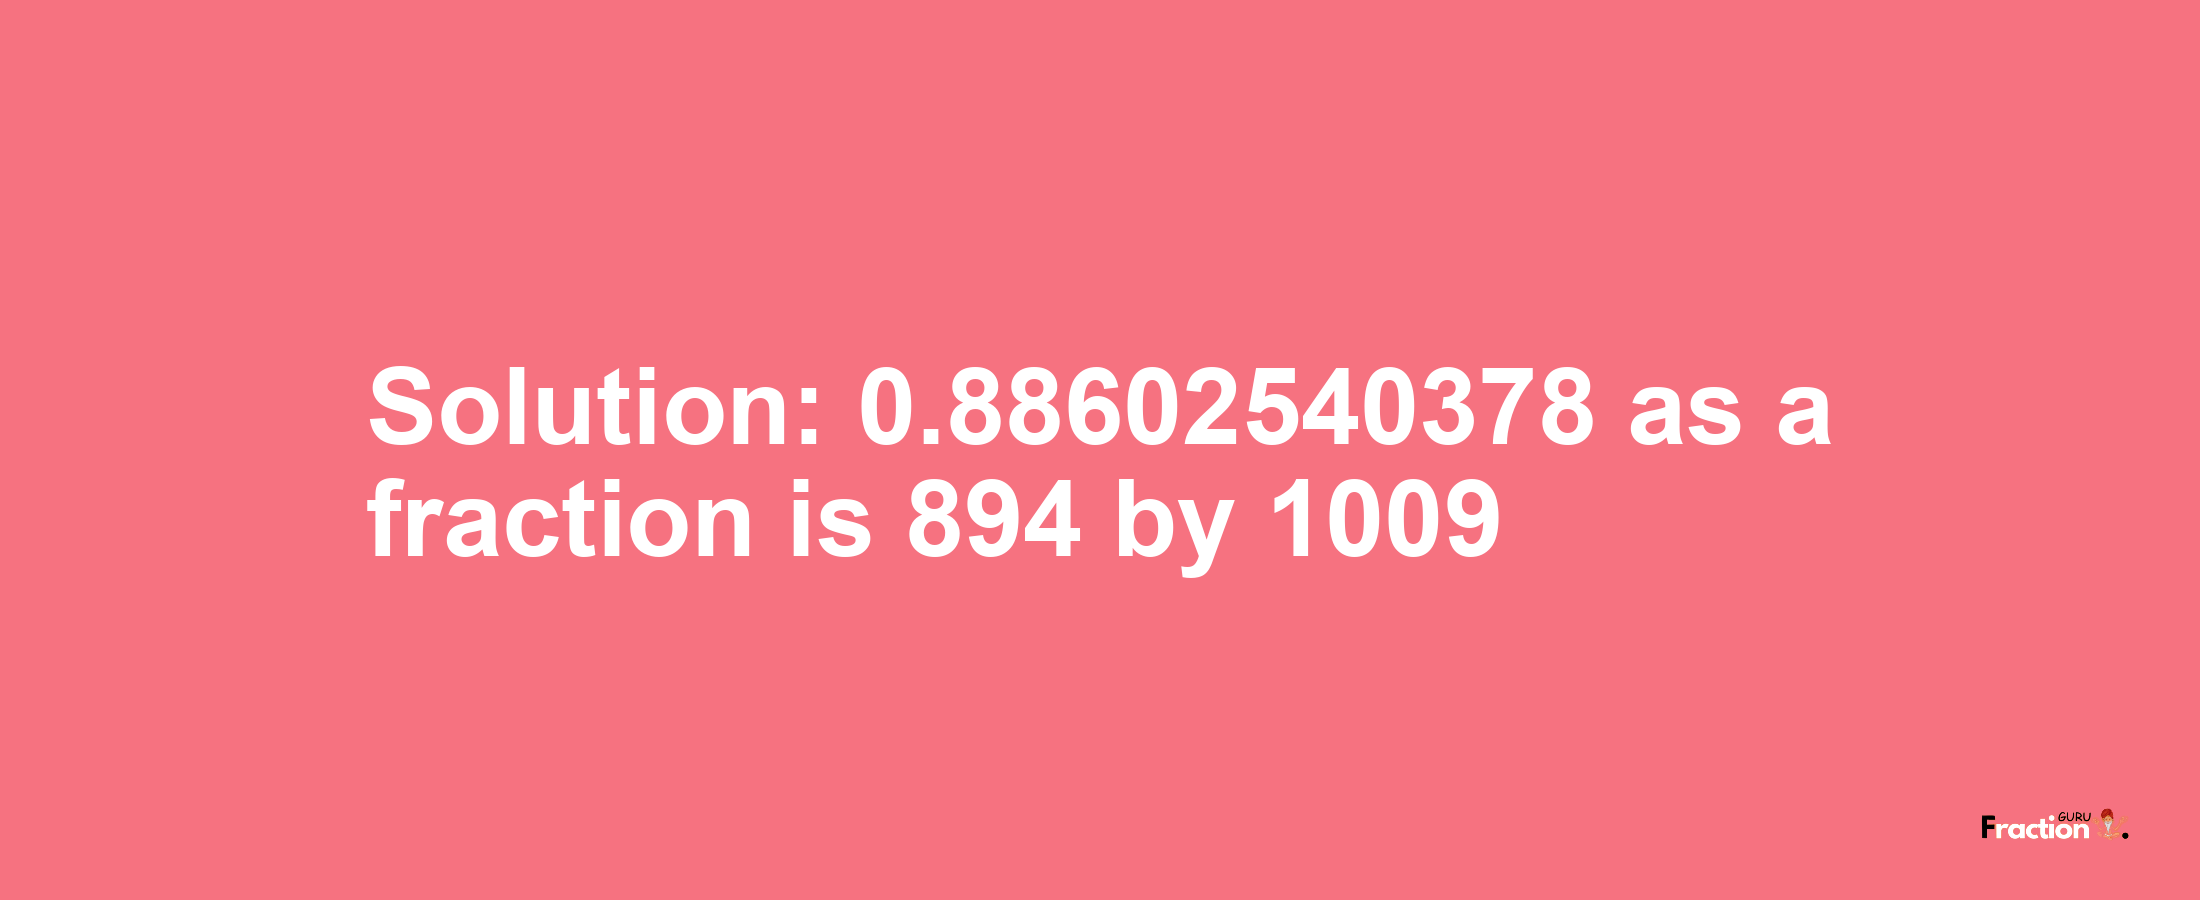 Solution:0.88602540378 as a fraction is 894/1009